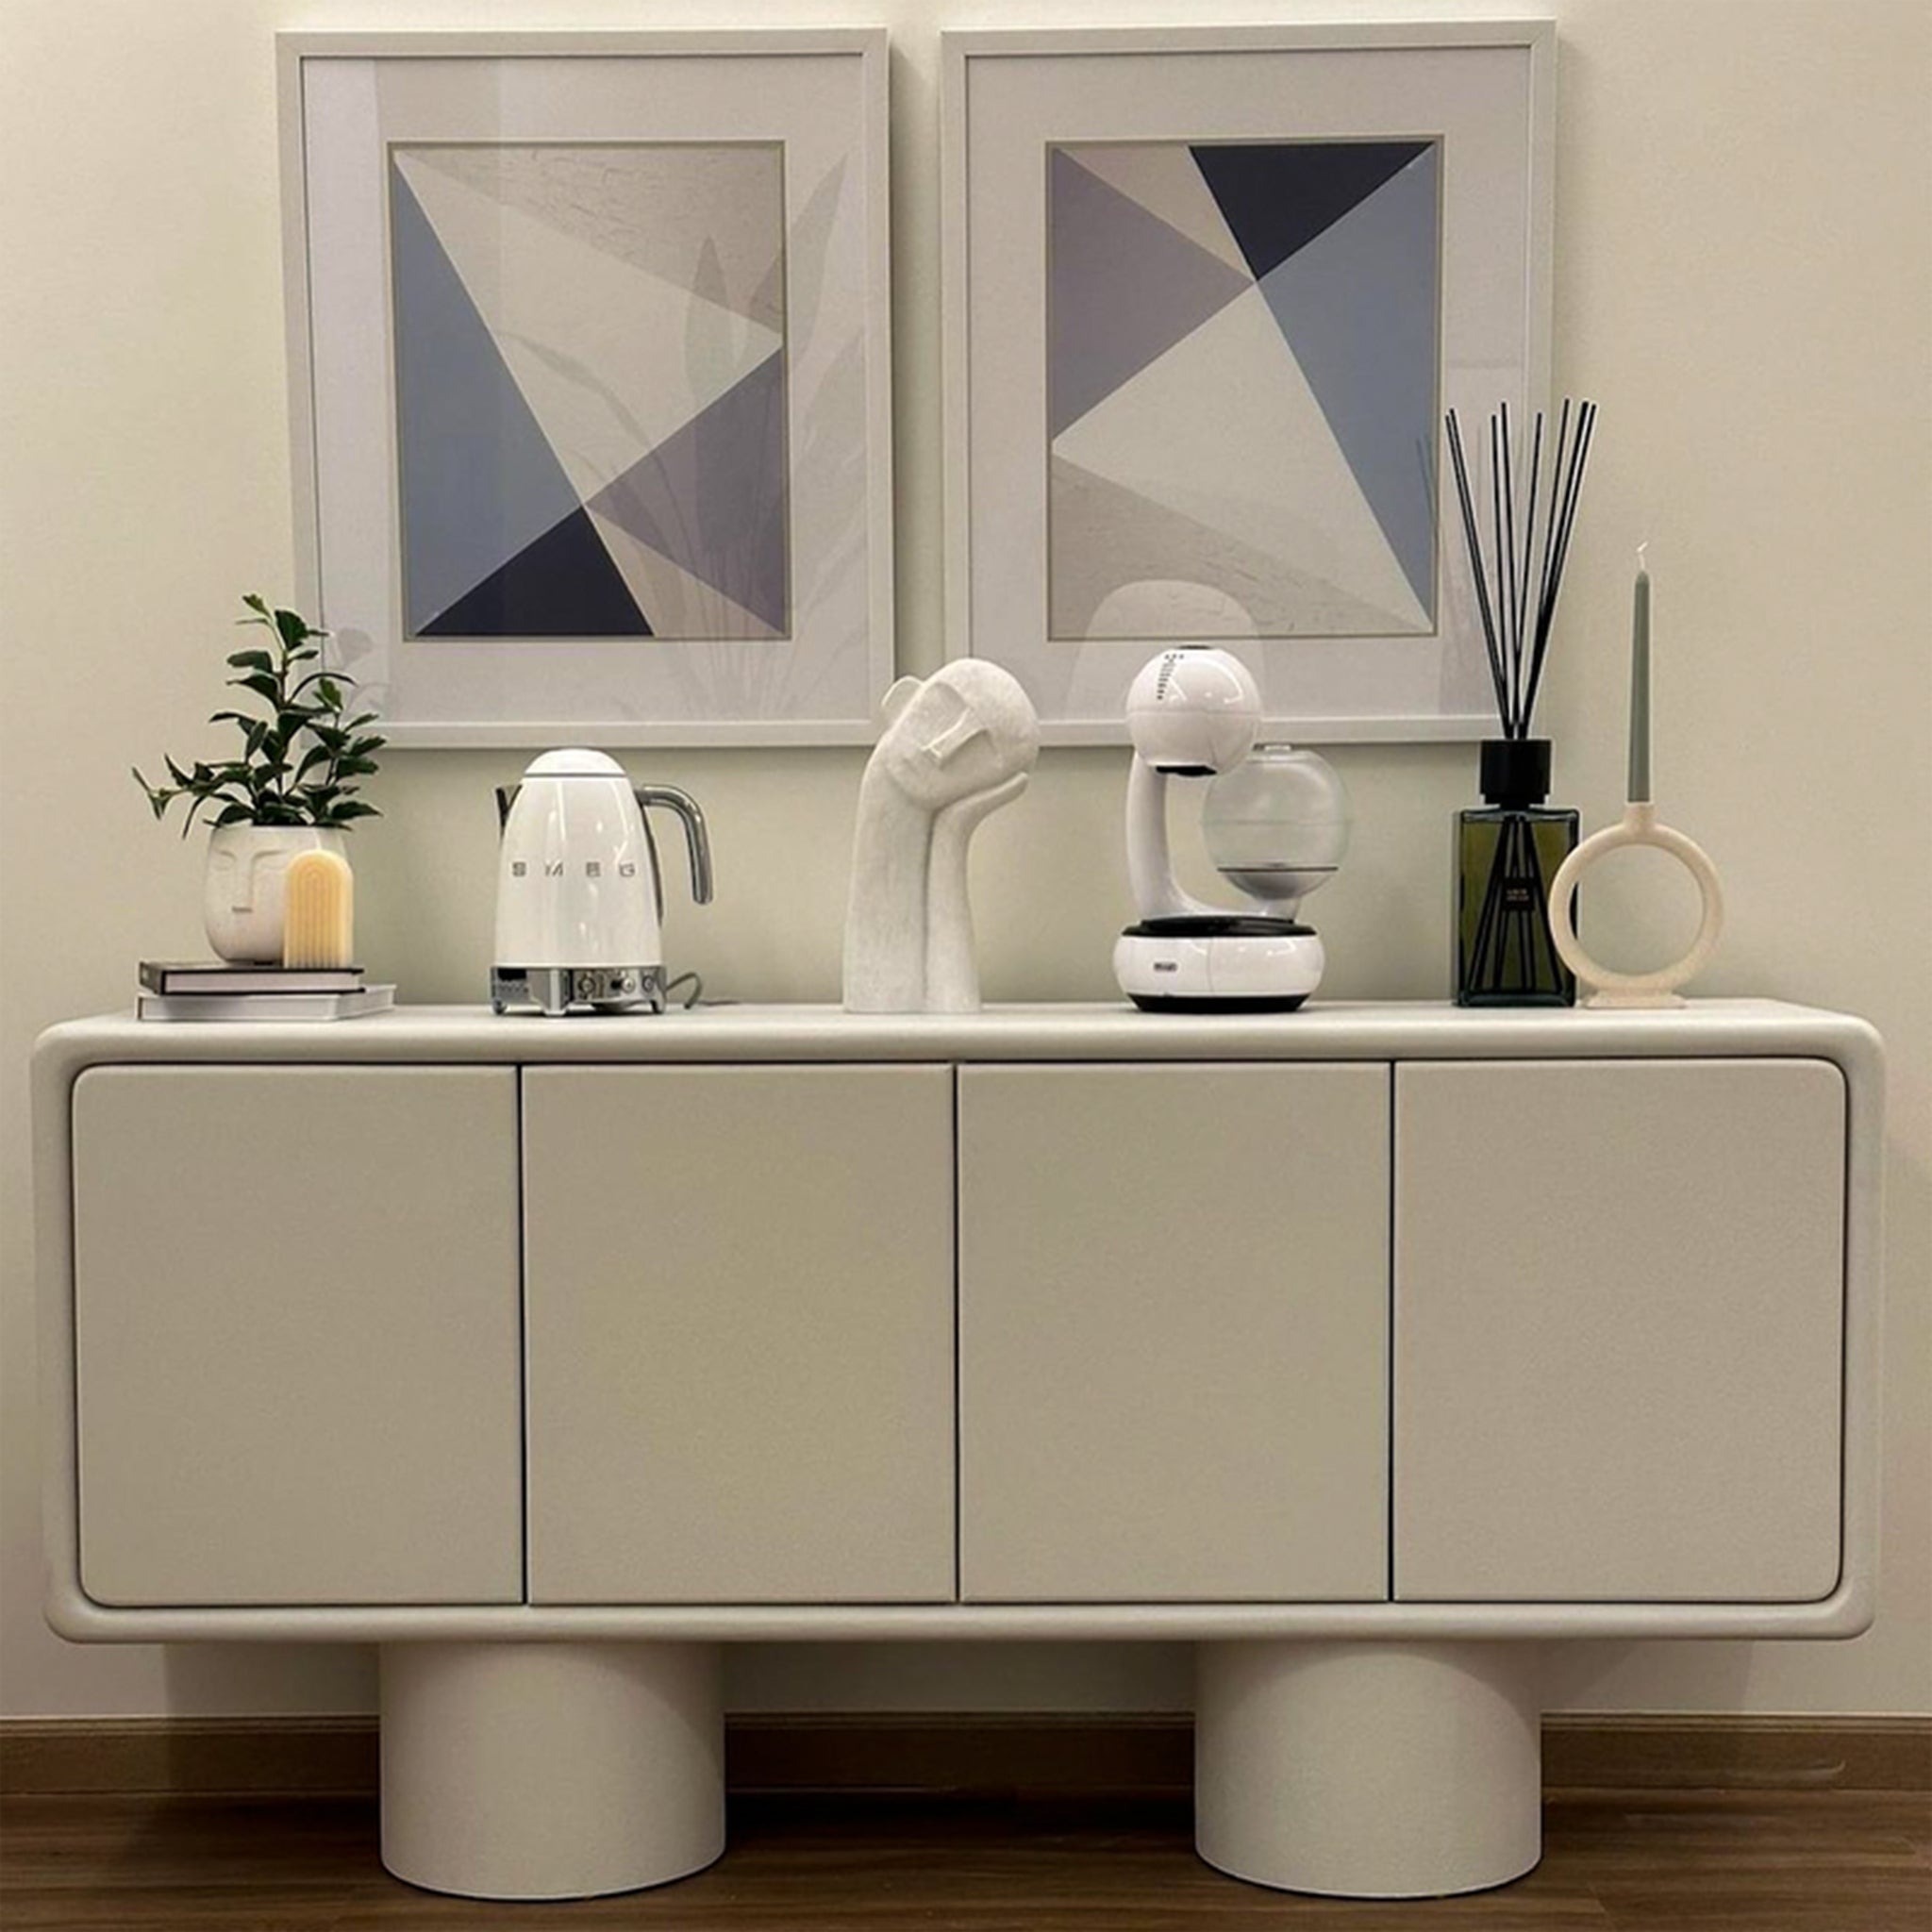 A beige sideboard with a minimalist design, featuring four doors and cylindrical legs, decorated with modern art pieces, a small plant, a kettle, and other contemporary items, placed against a wall with geometric framed artworks.